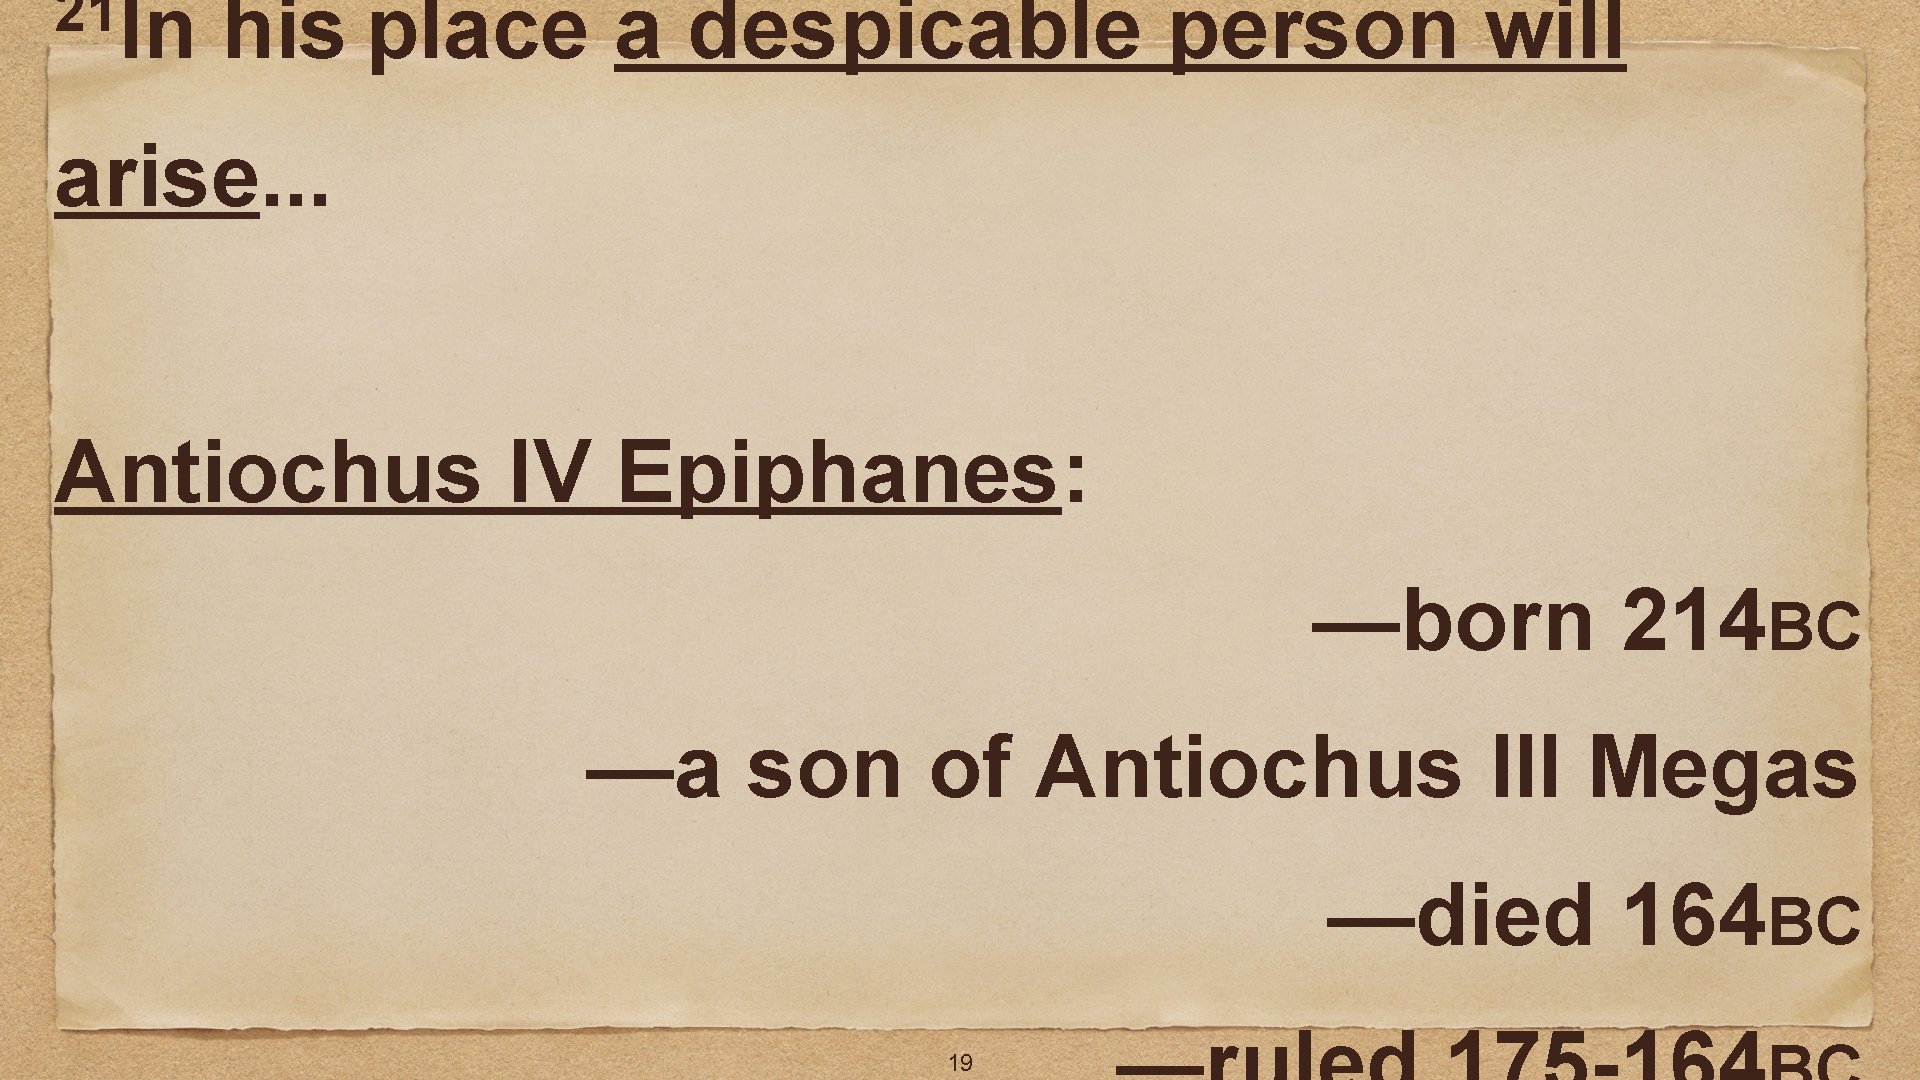 21 In his place a despicable person will arise. . . Antiochus IV Epiphanes: